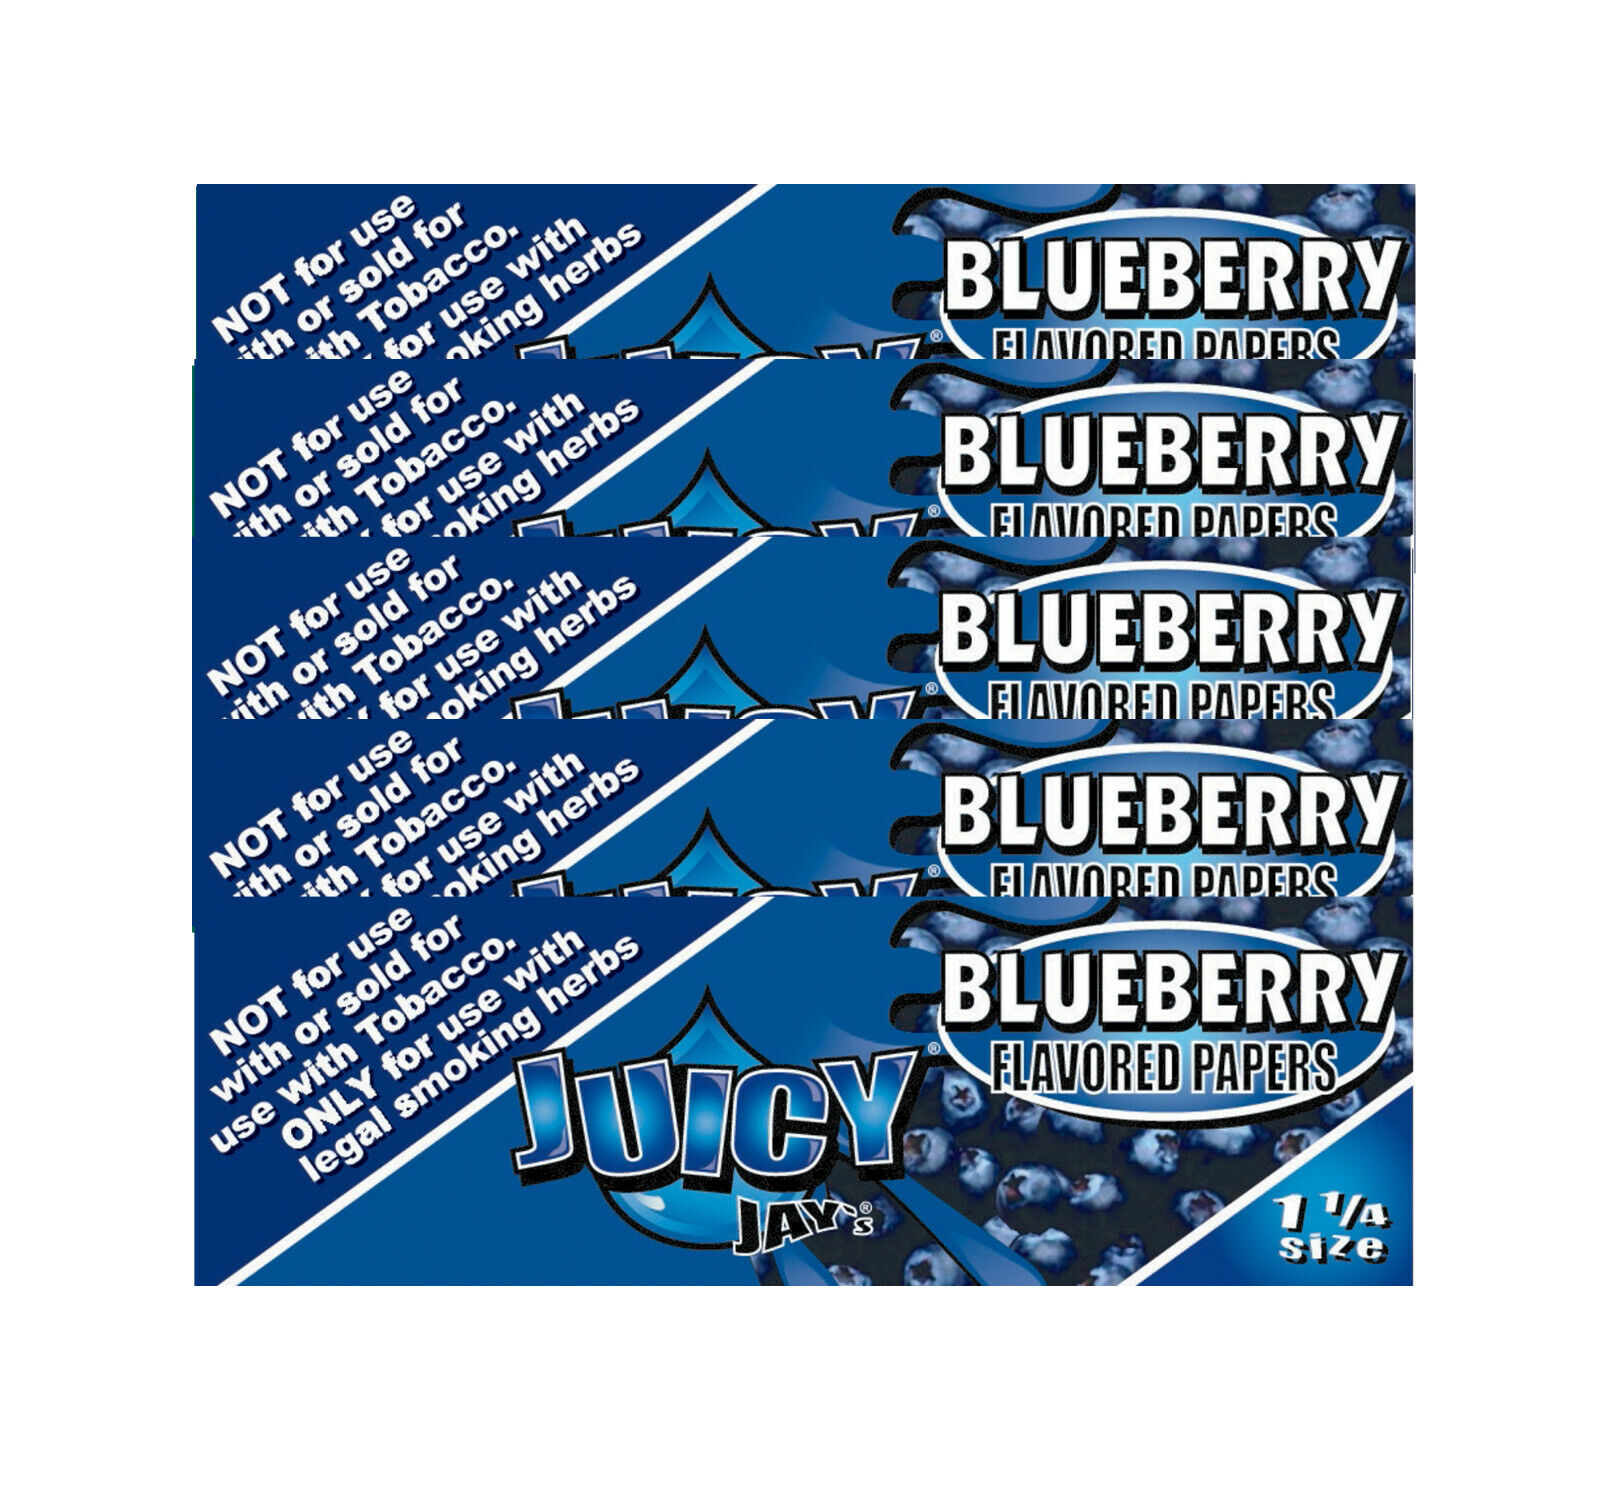 Juicy Jay's Blueberry Flavored Rolling Papers 1.25 5 Packs